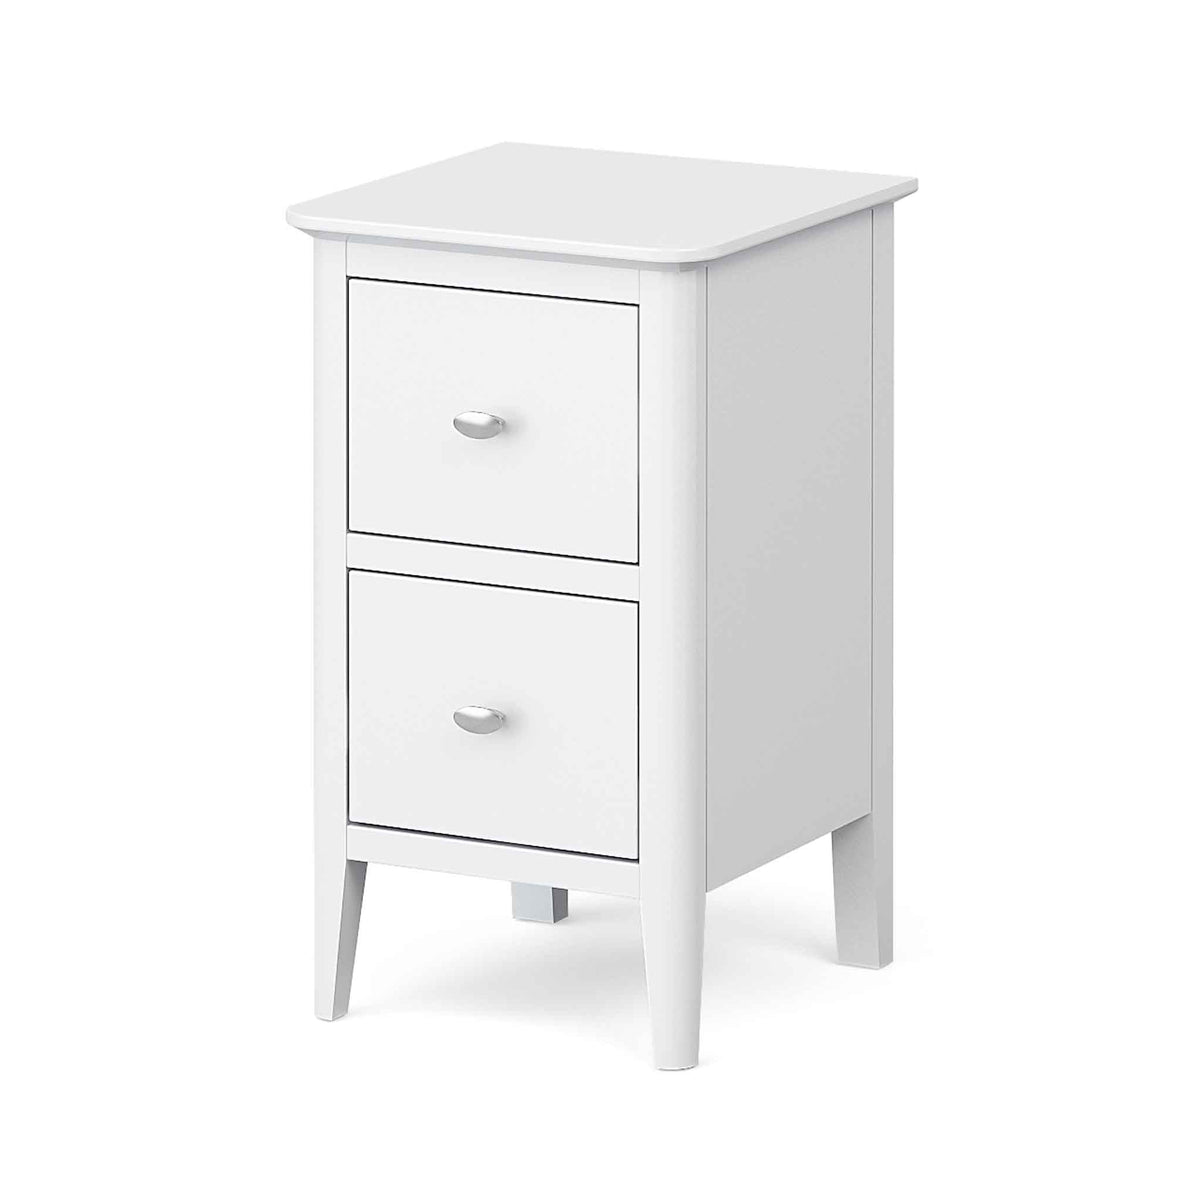 Chester White Narrow Bedside Drawers Table - Side view